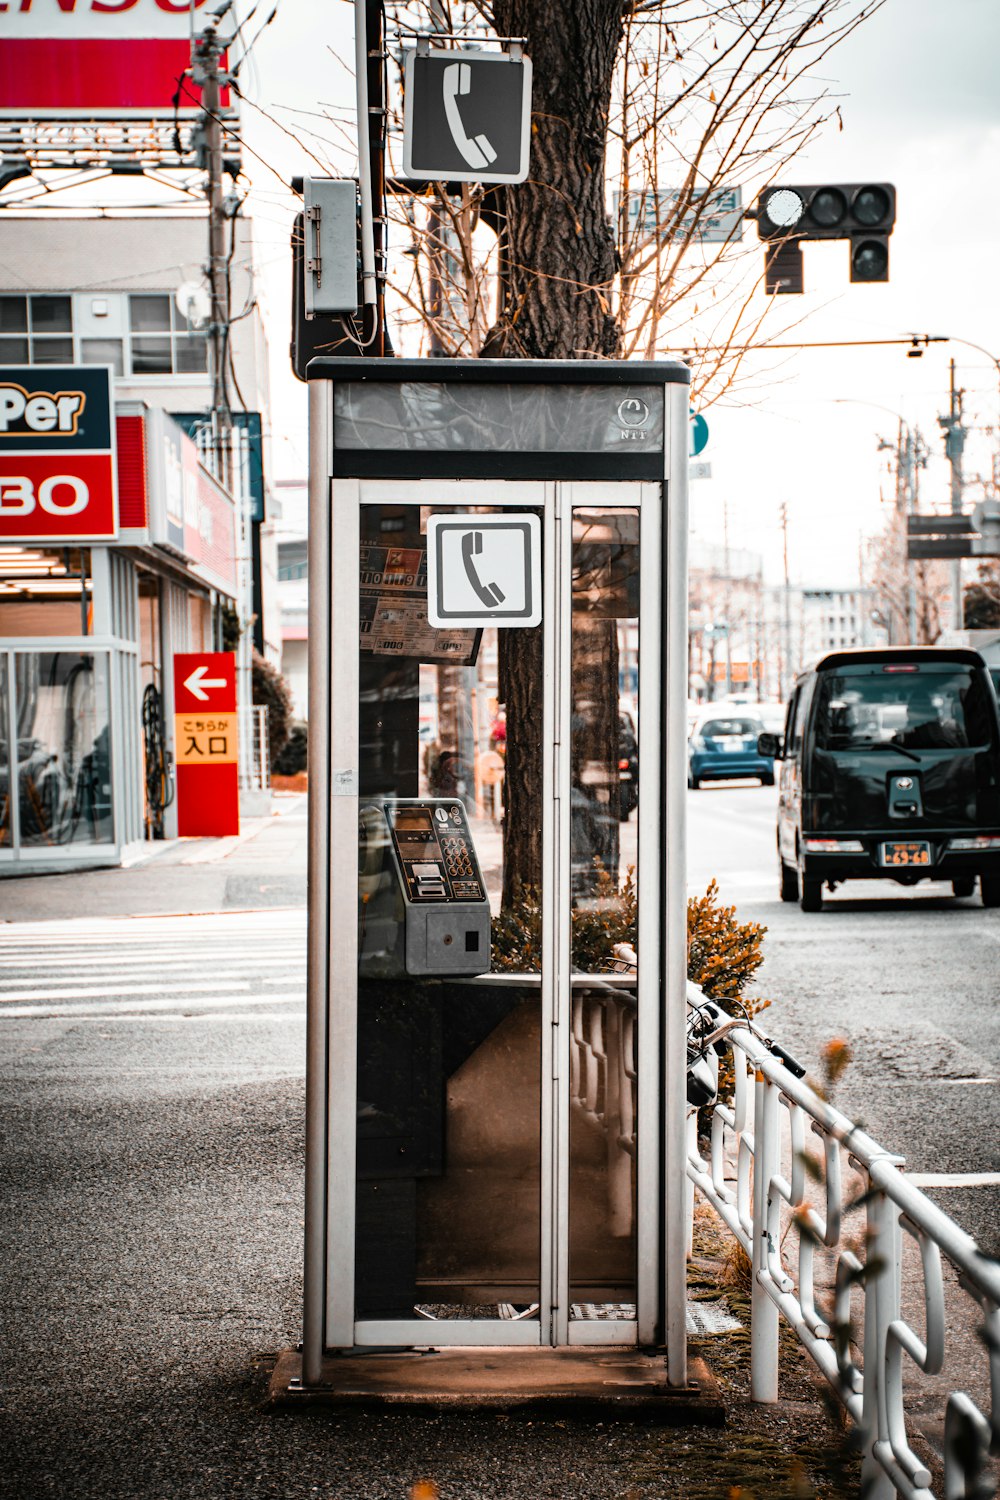 a phone booth sitting on the side of a road